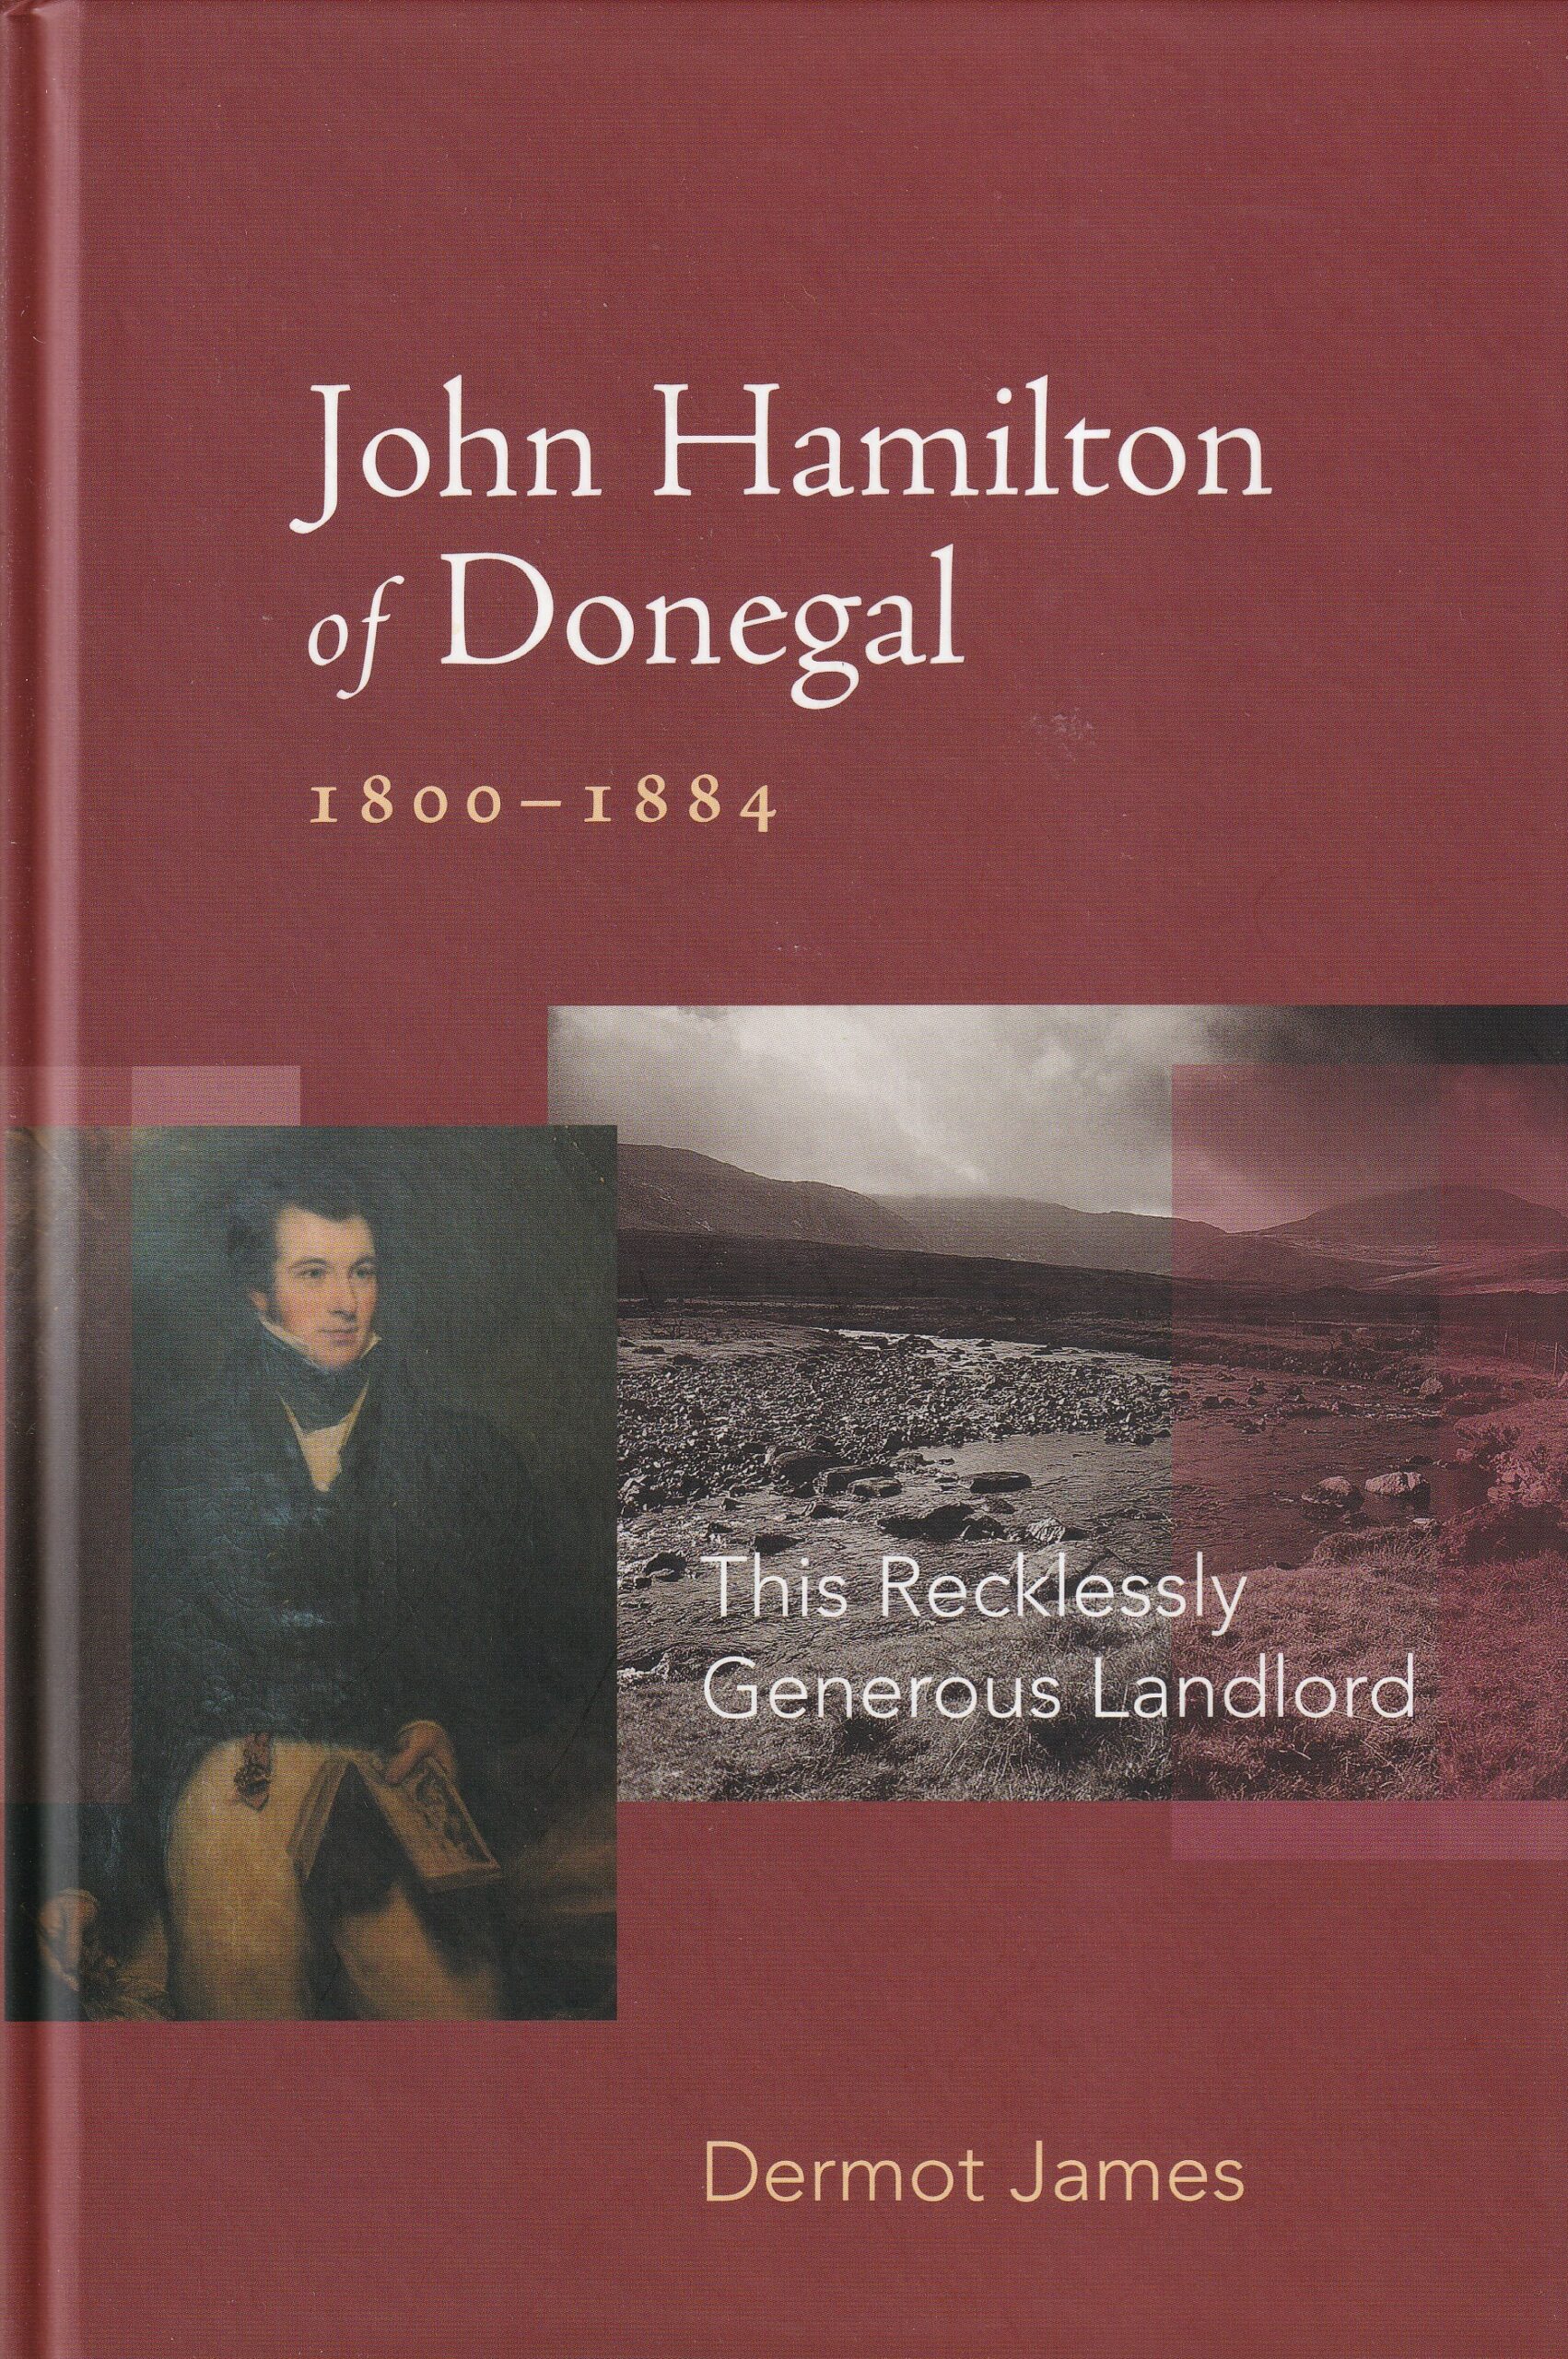 John Hamilton of Donegal 1800-1884: This Recklessly Generous Landlord by Dermot James